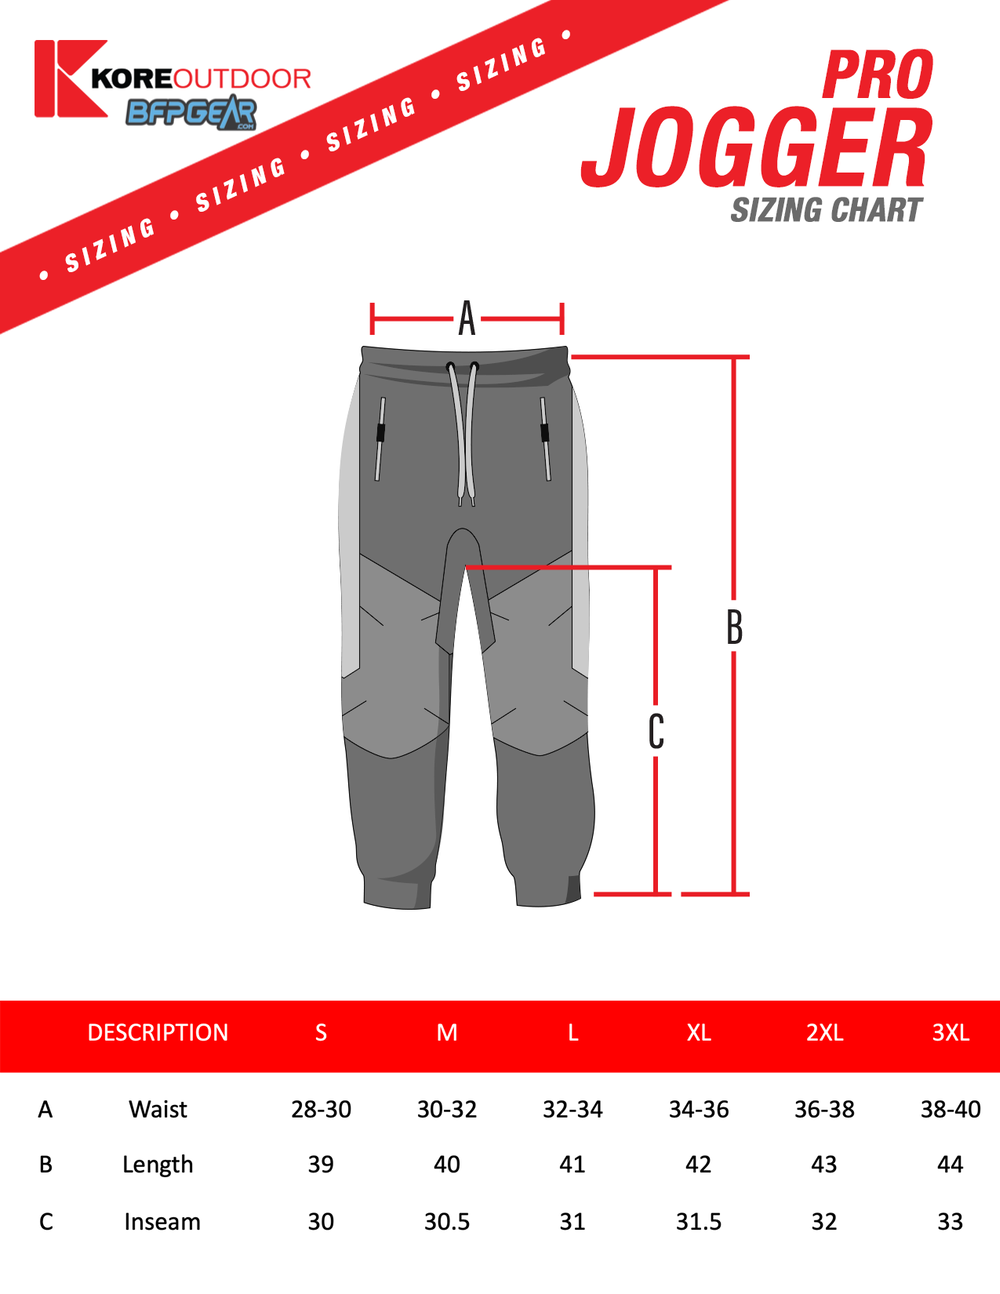 Pro Joggers Sizing Chart - Kore Outdoor